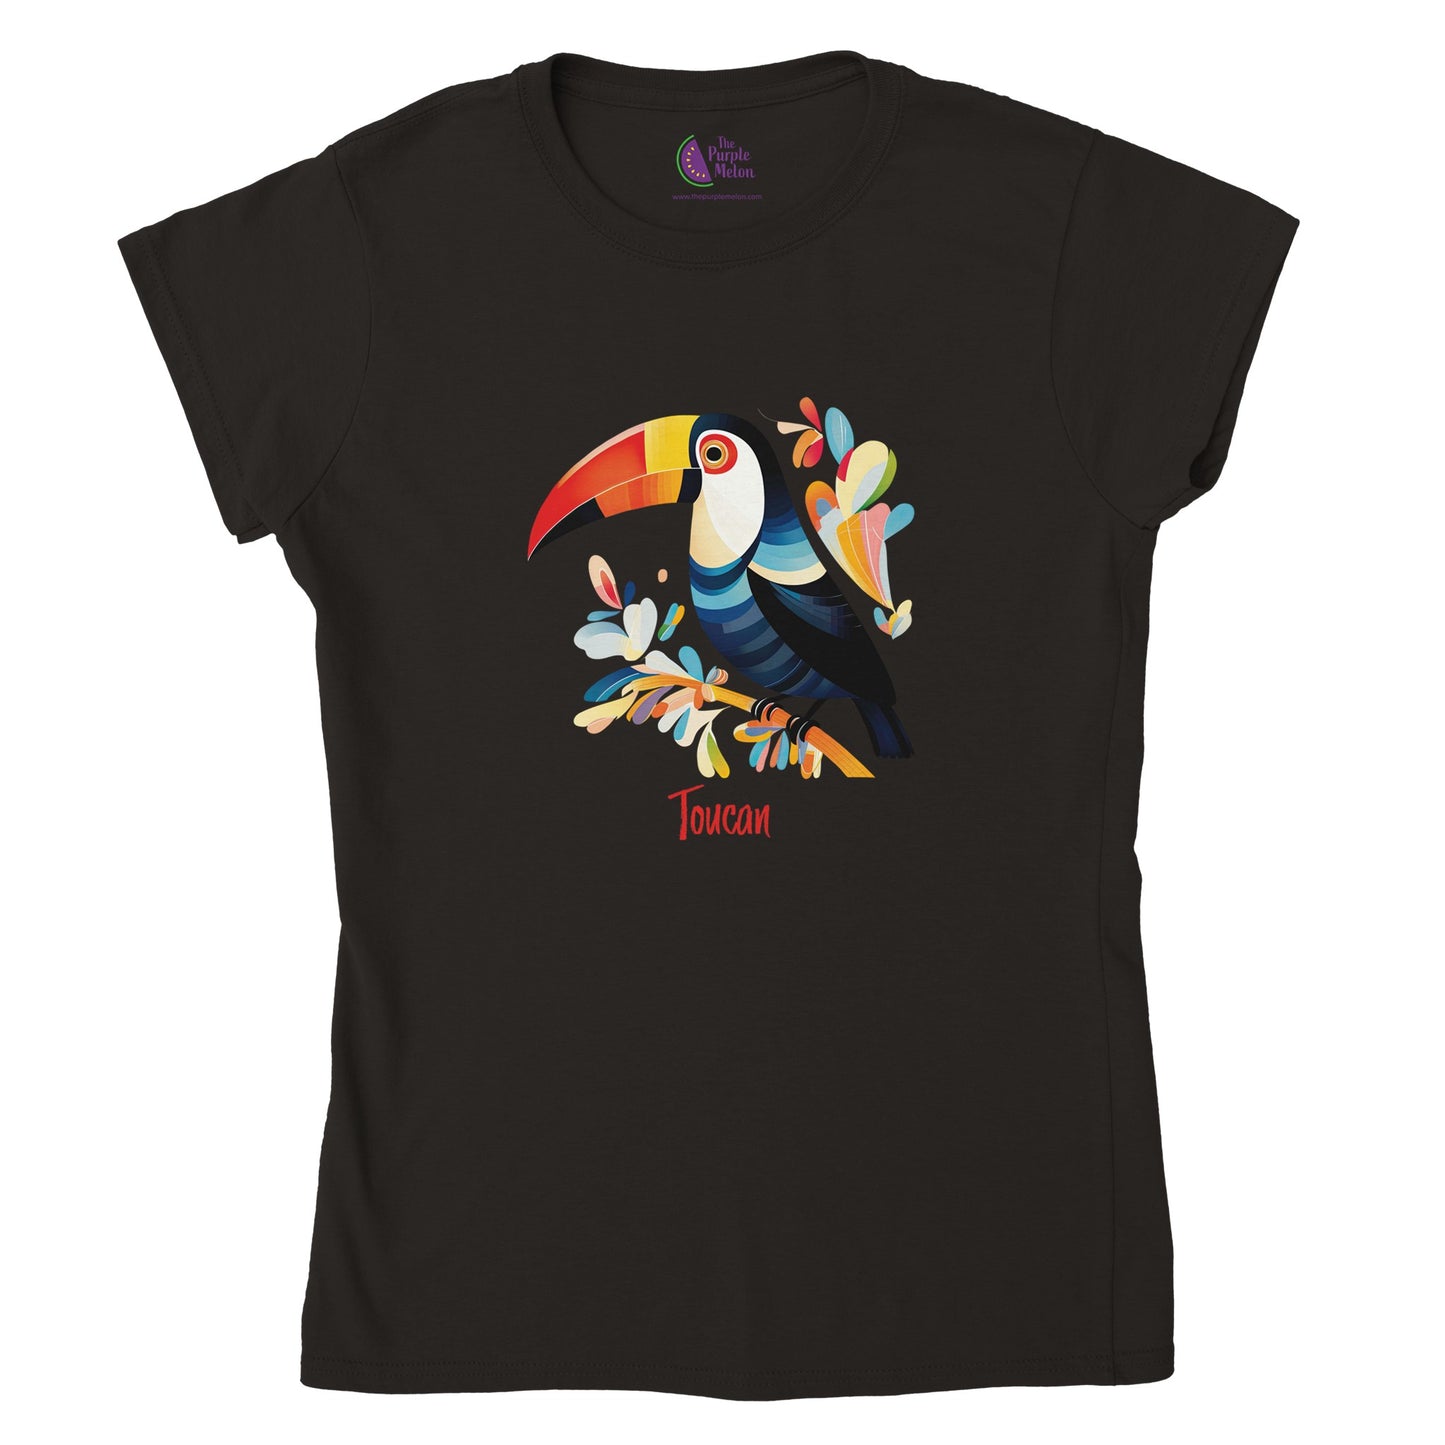 black t-shirt with a toucan print